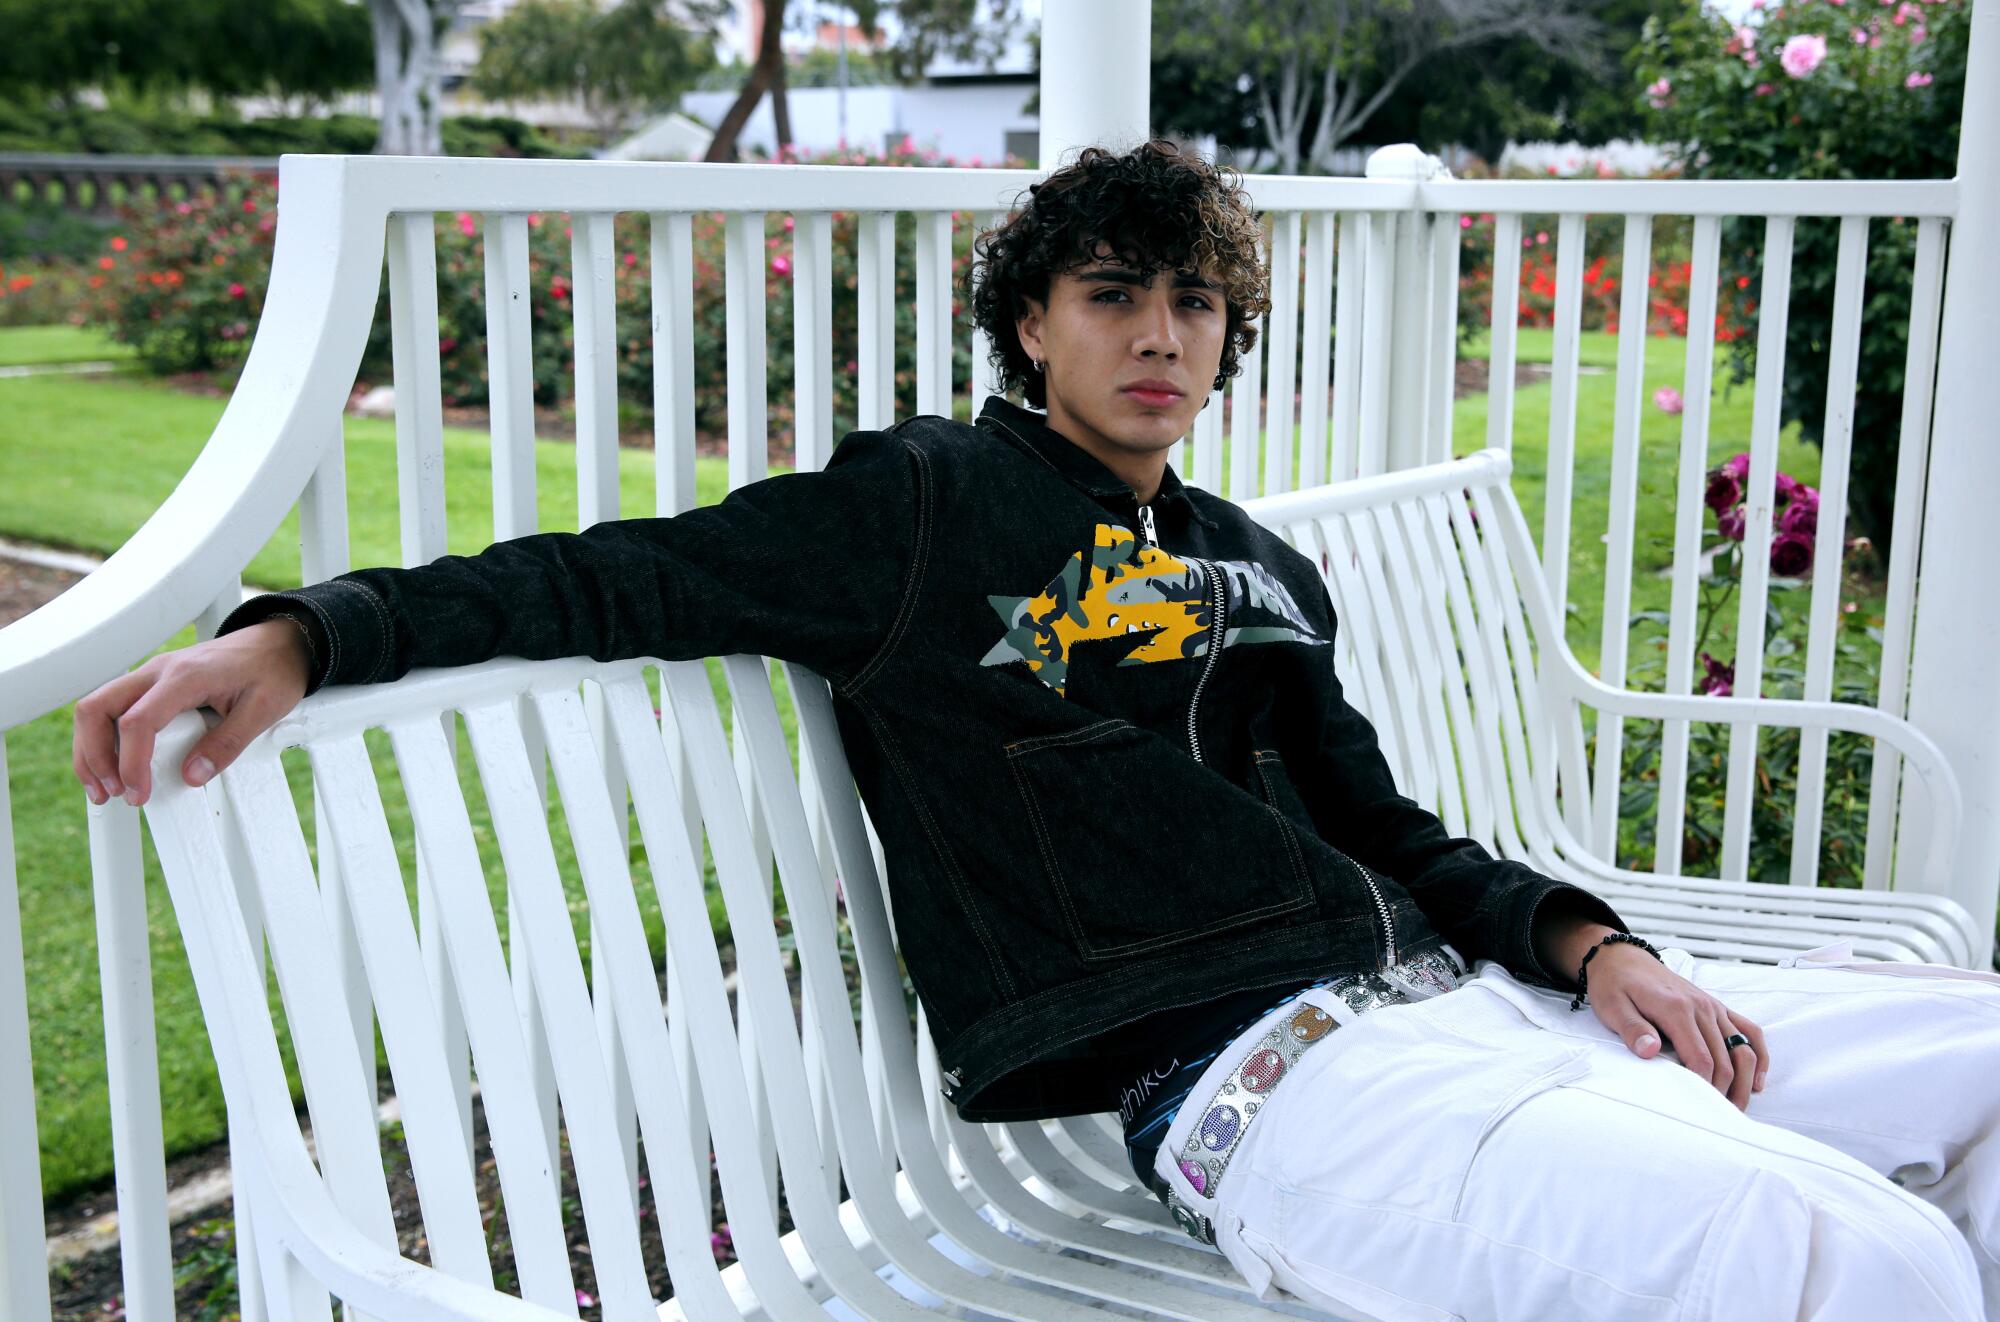 DannyLux sits on a white bench at the Exposition Park Rose Garden